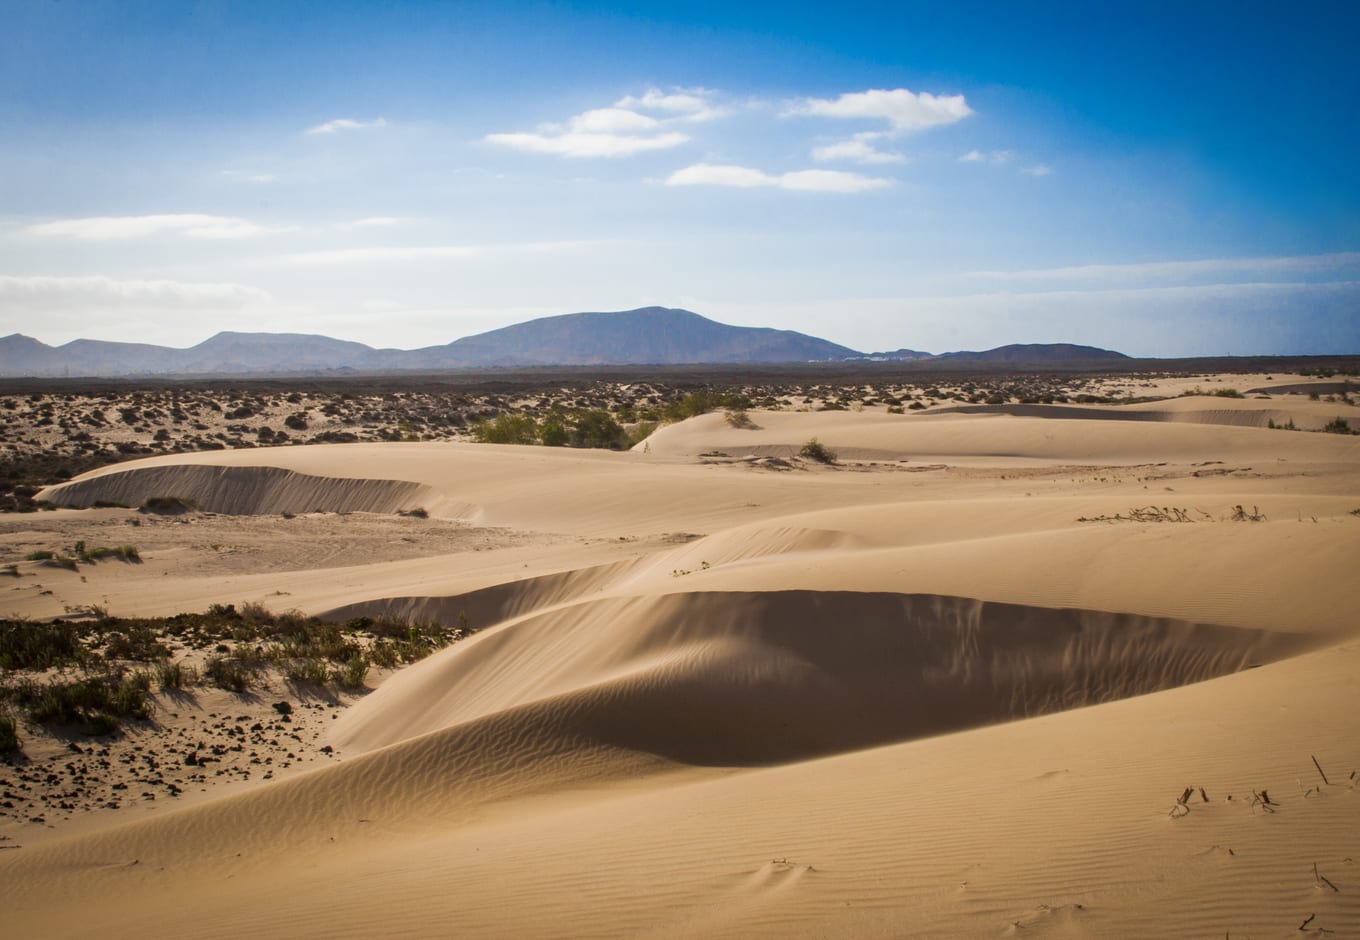 The Sand Dunes at the Corralejo  Park, in the Canary Islands, Spain.
